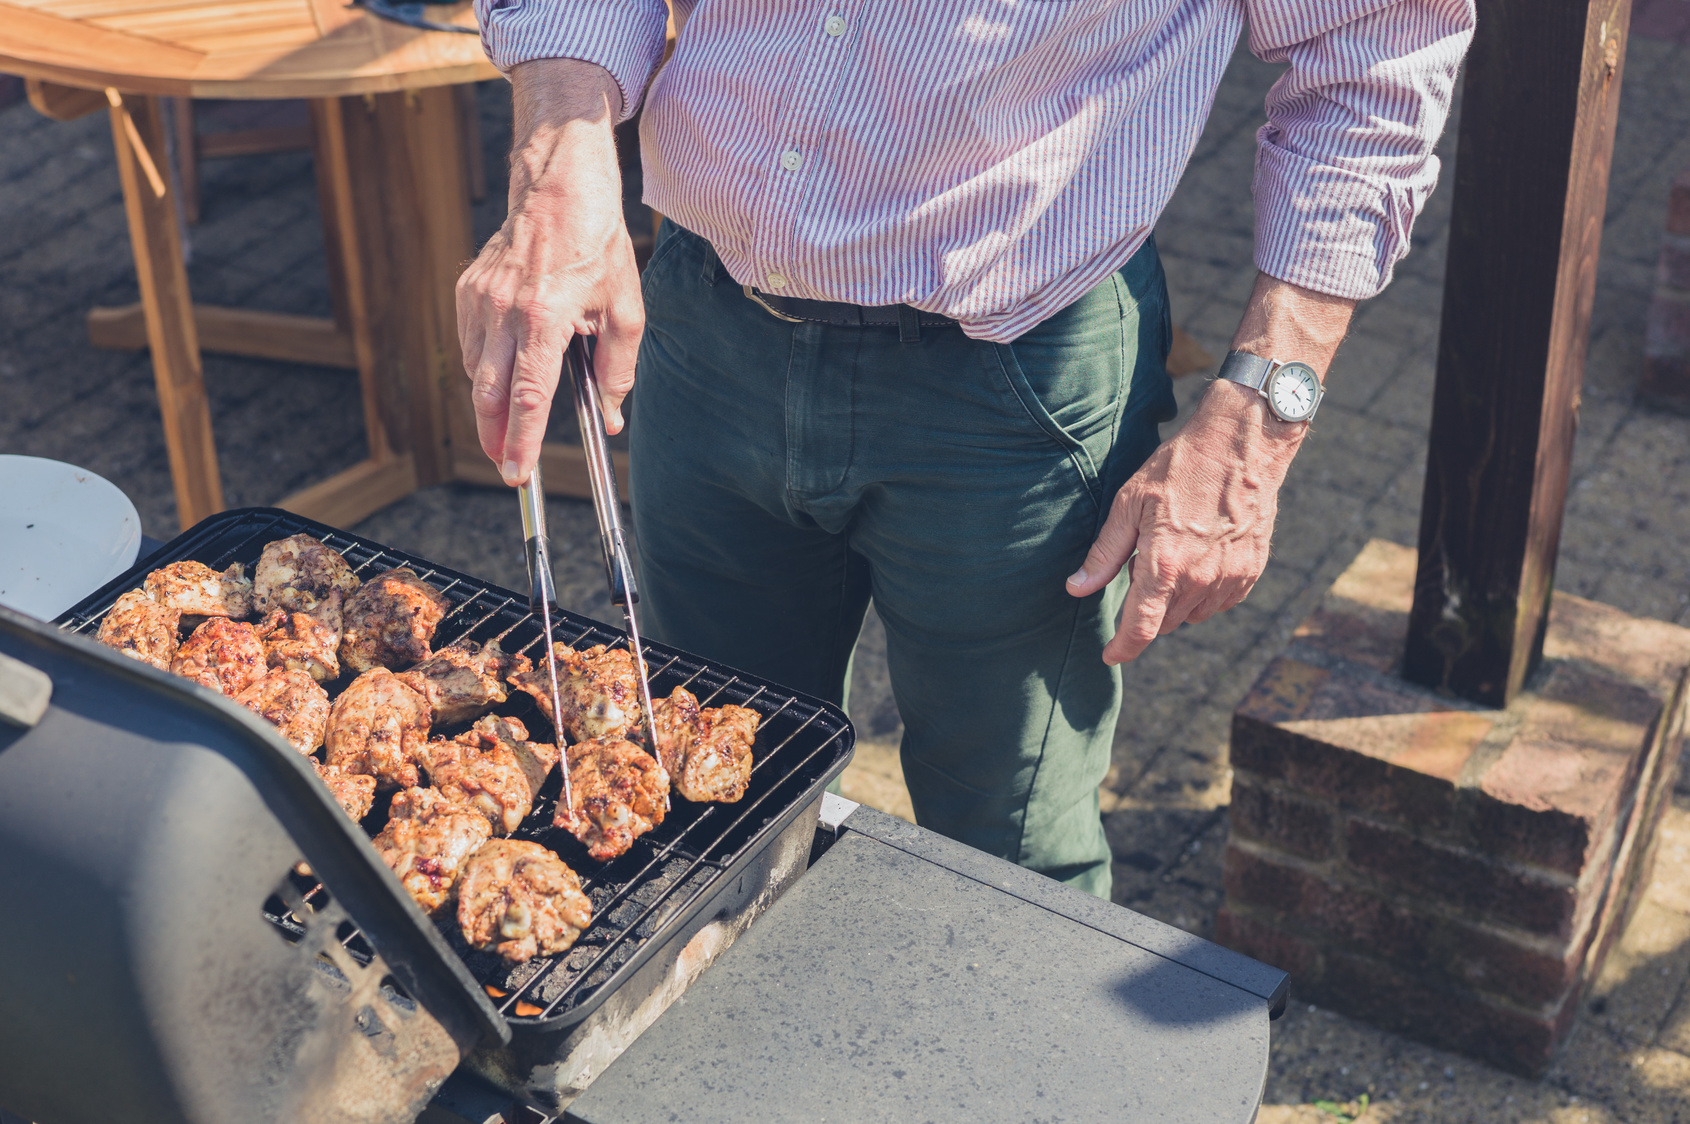 Top tips for BBQ safety